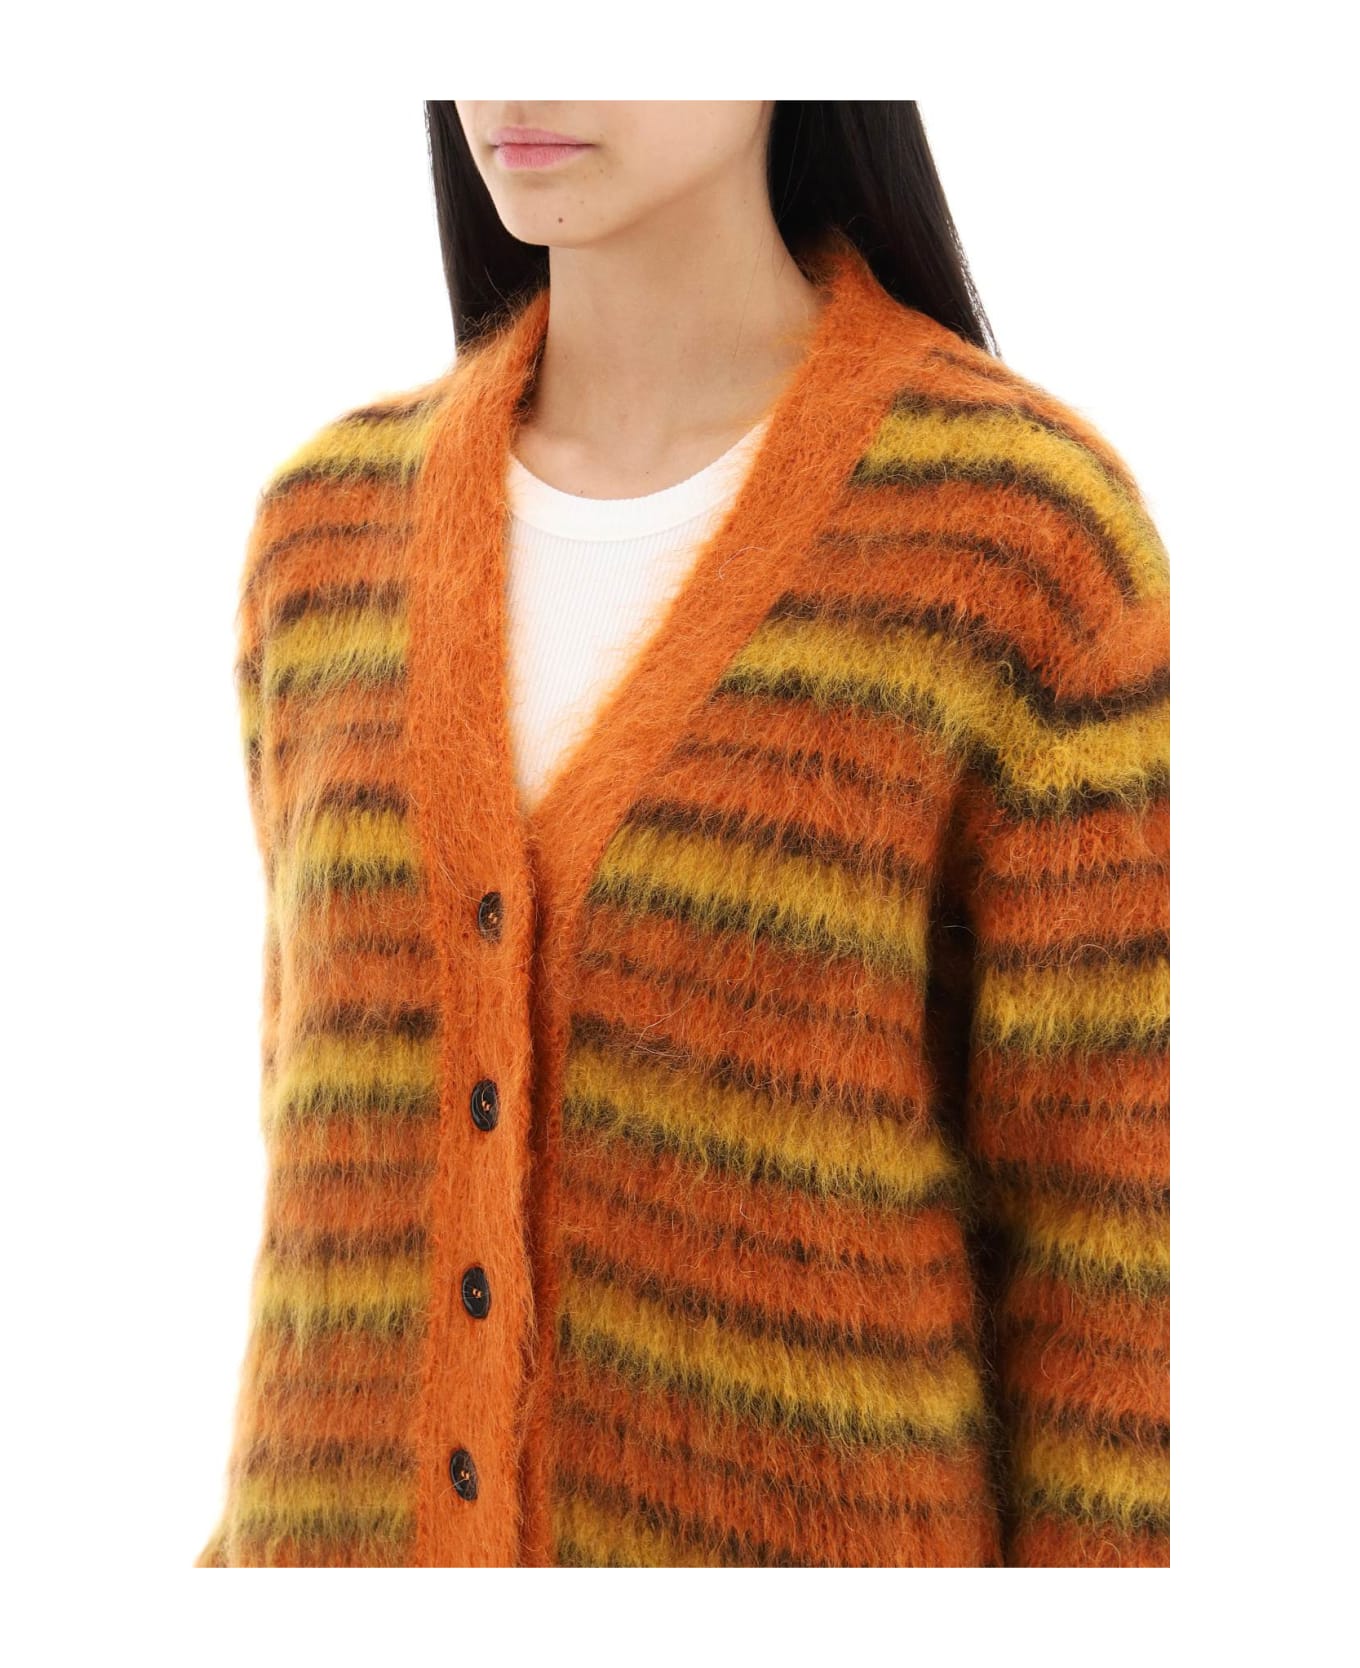 Marni Cardigan In Striped Brushed Mohair - Brick Red カーディガン